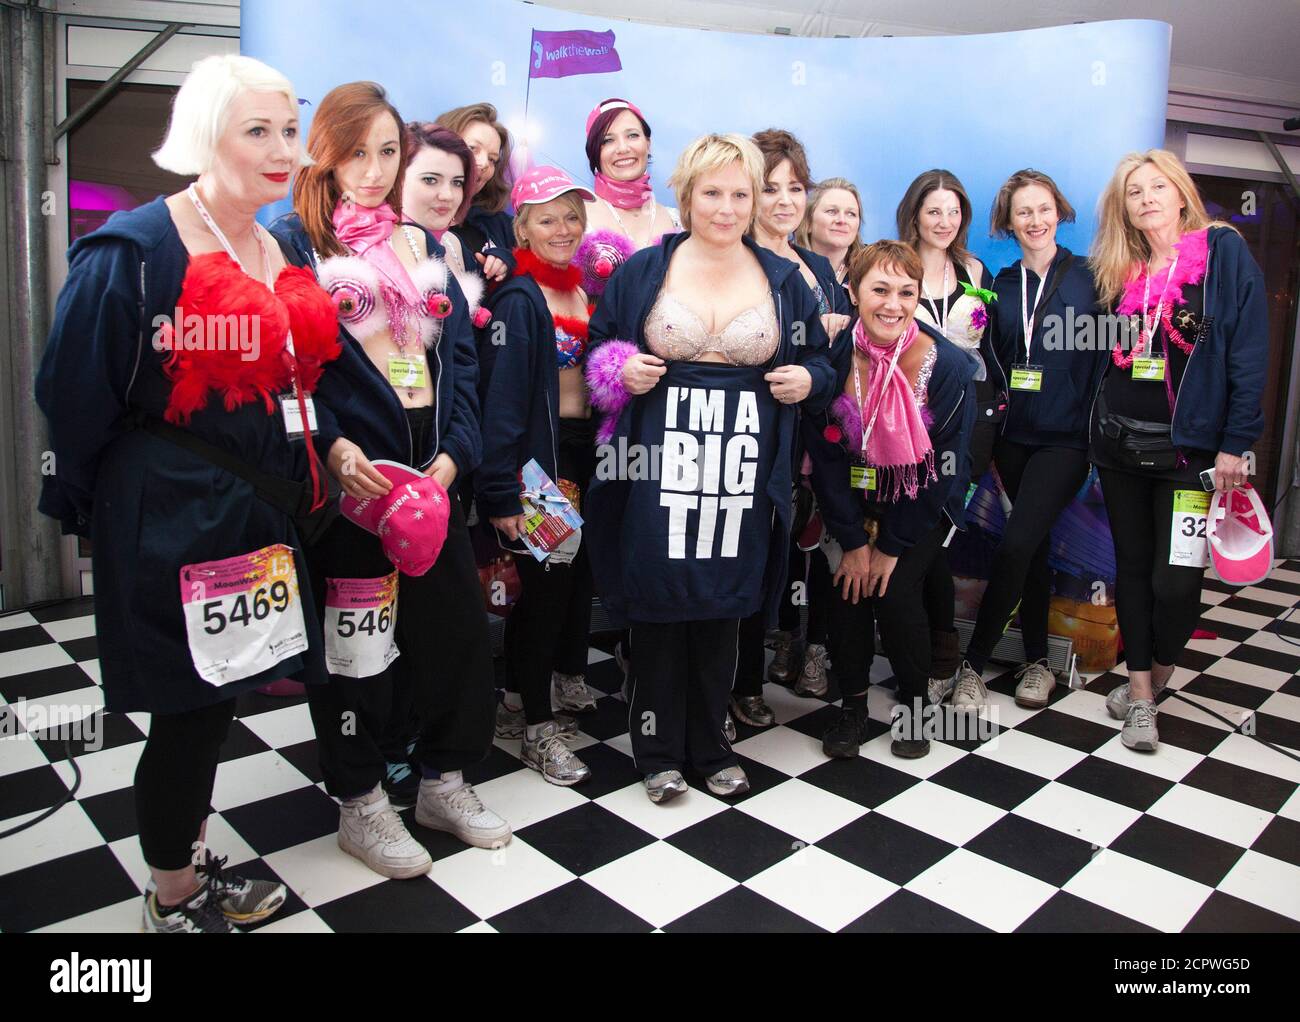 Jennifer Saunders with members of her team (Jen's Big Tits Team). The MoonWalk London 2012, Celebrating 15 years of Moon Walking for the breast cancer charity 'Walk the Walk'. Stock Photo